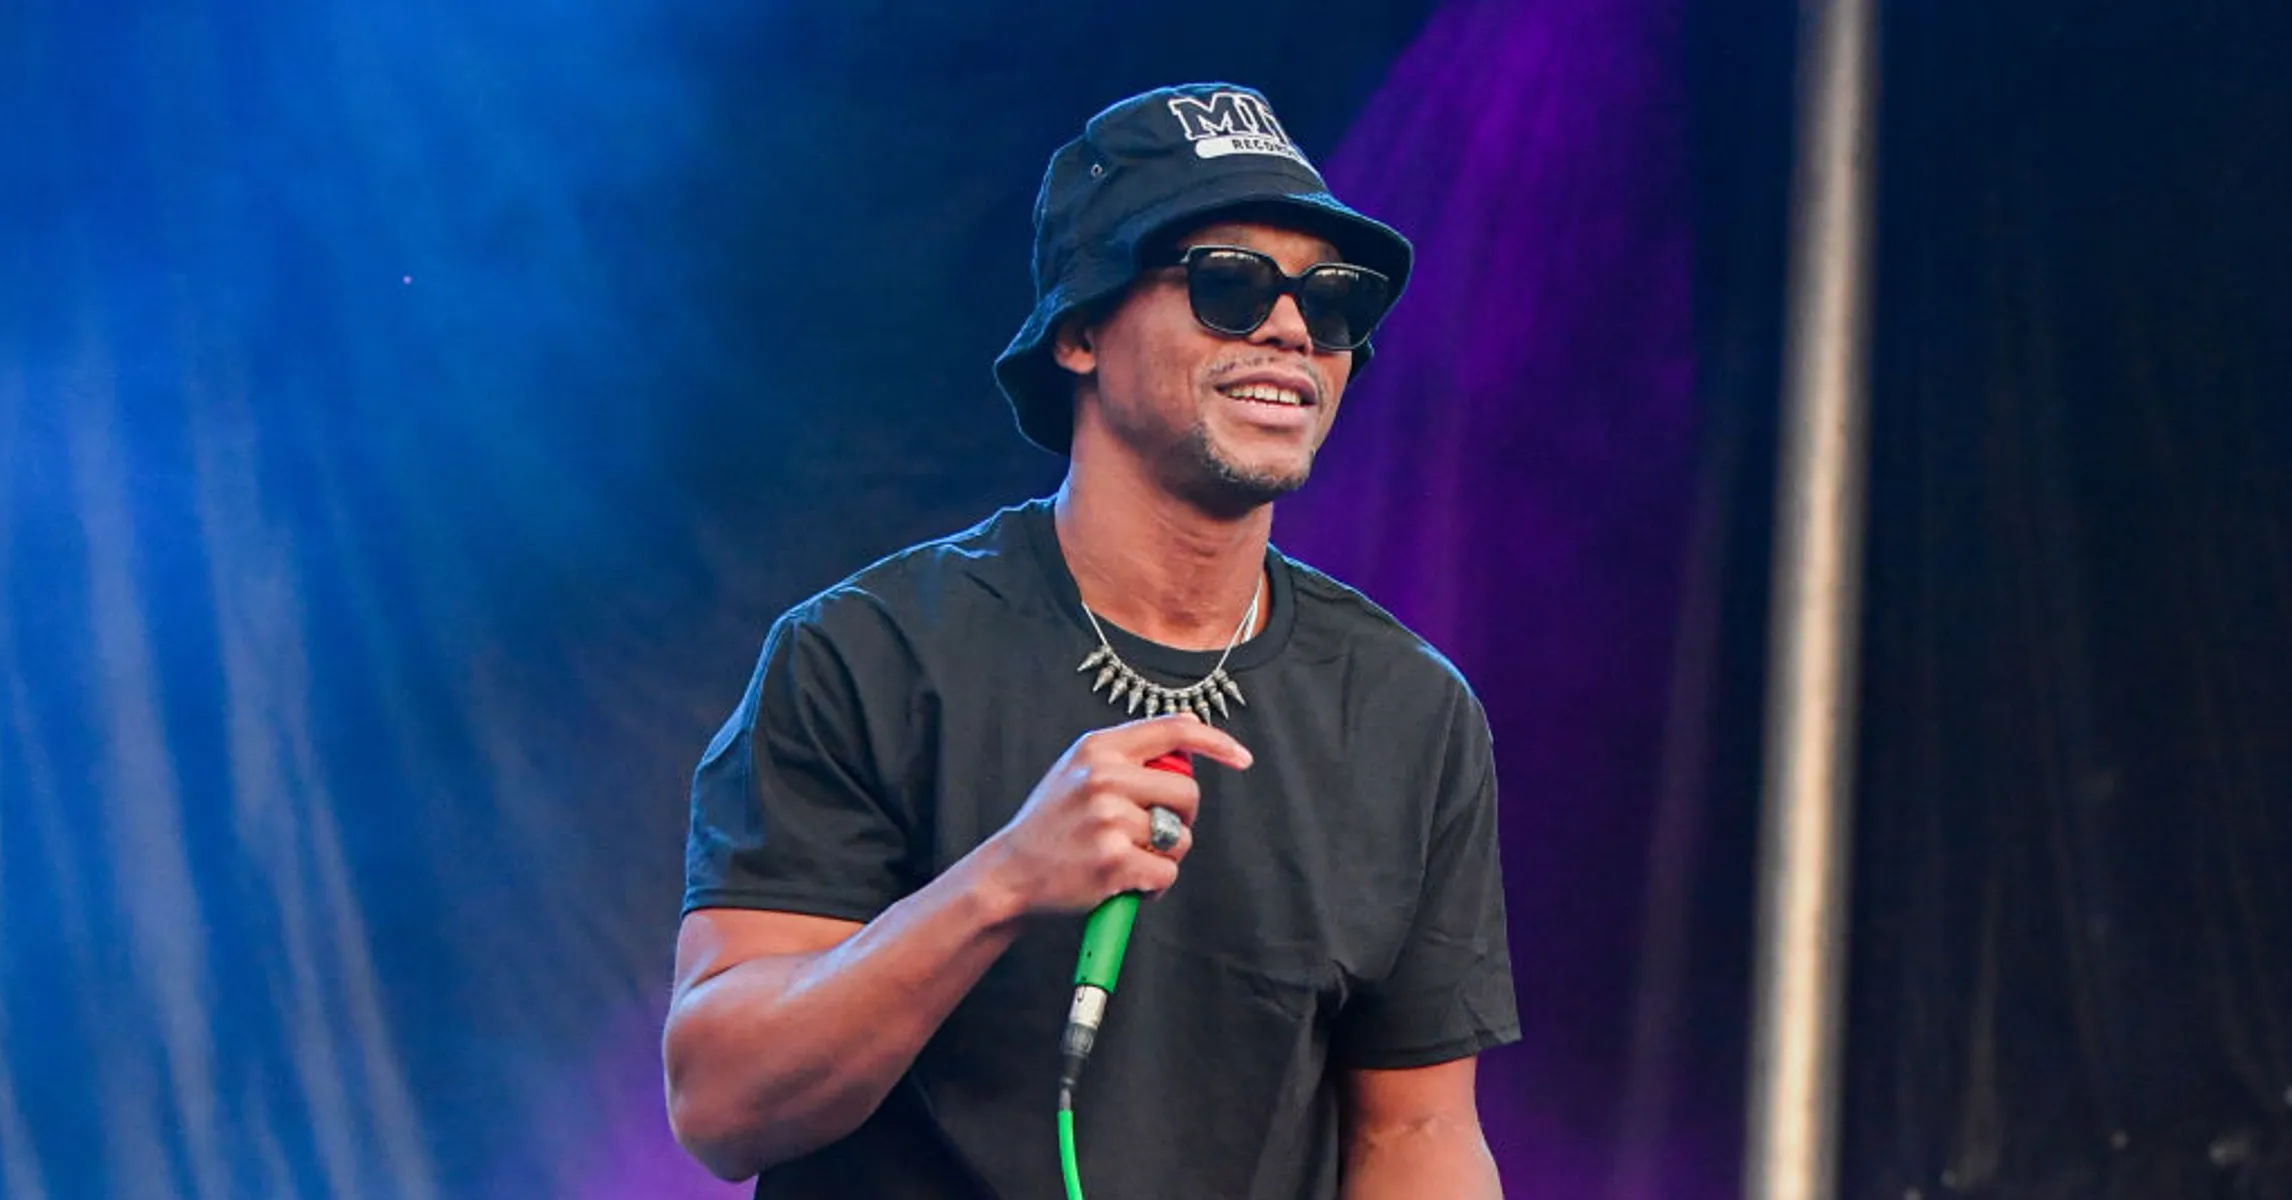 Lupe Fiasco Claims Drake Is A Better Rapper Than Kendrick Lamar